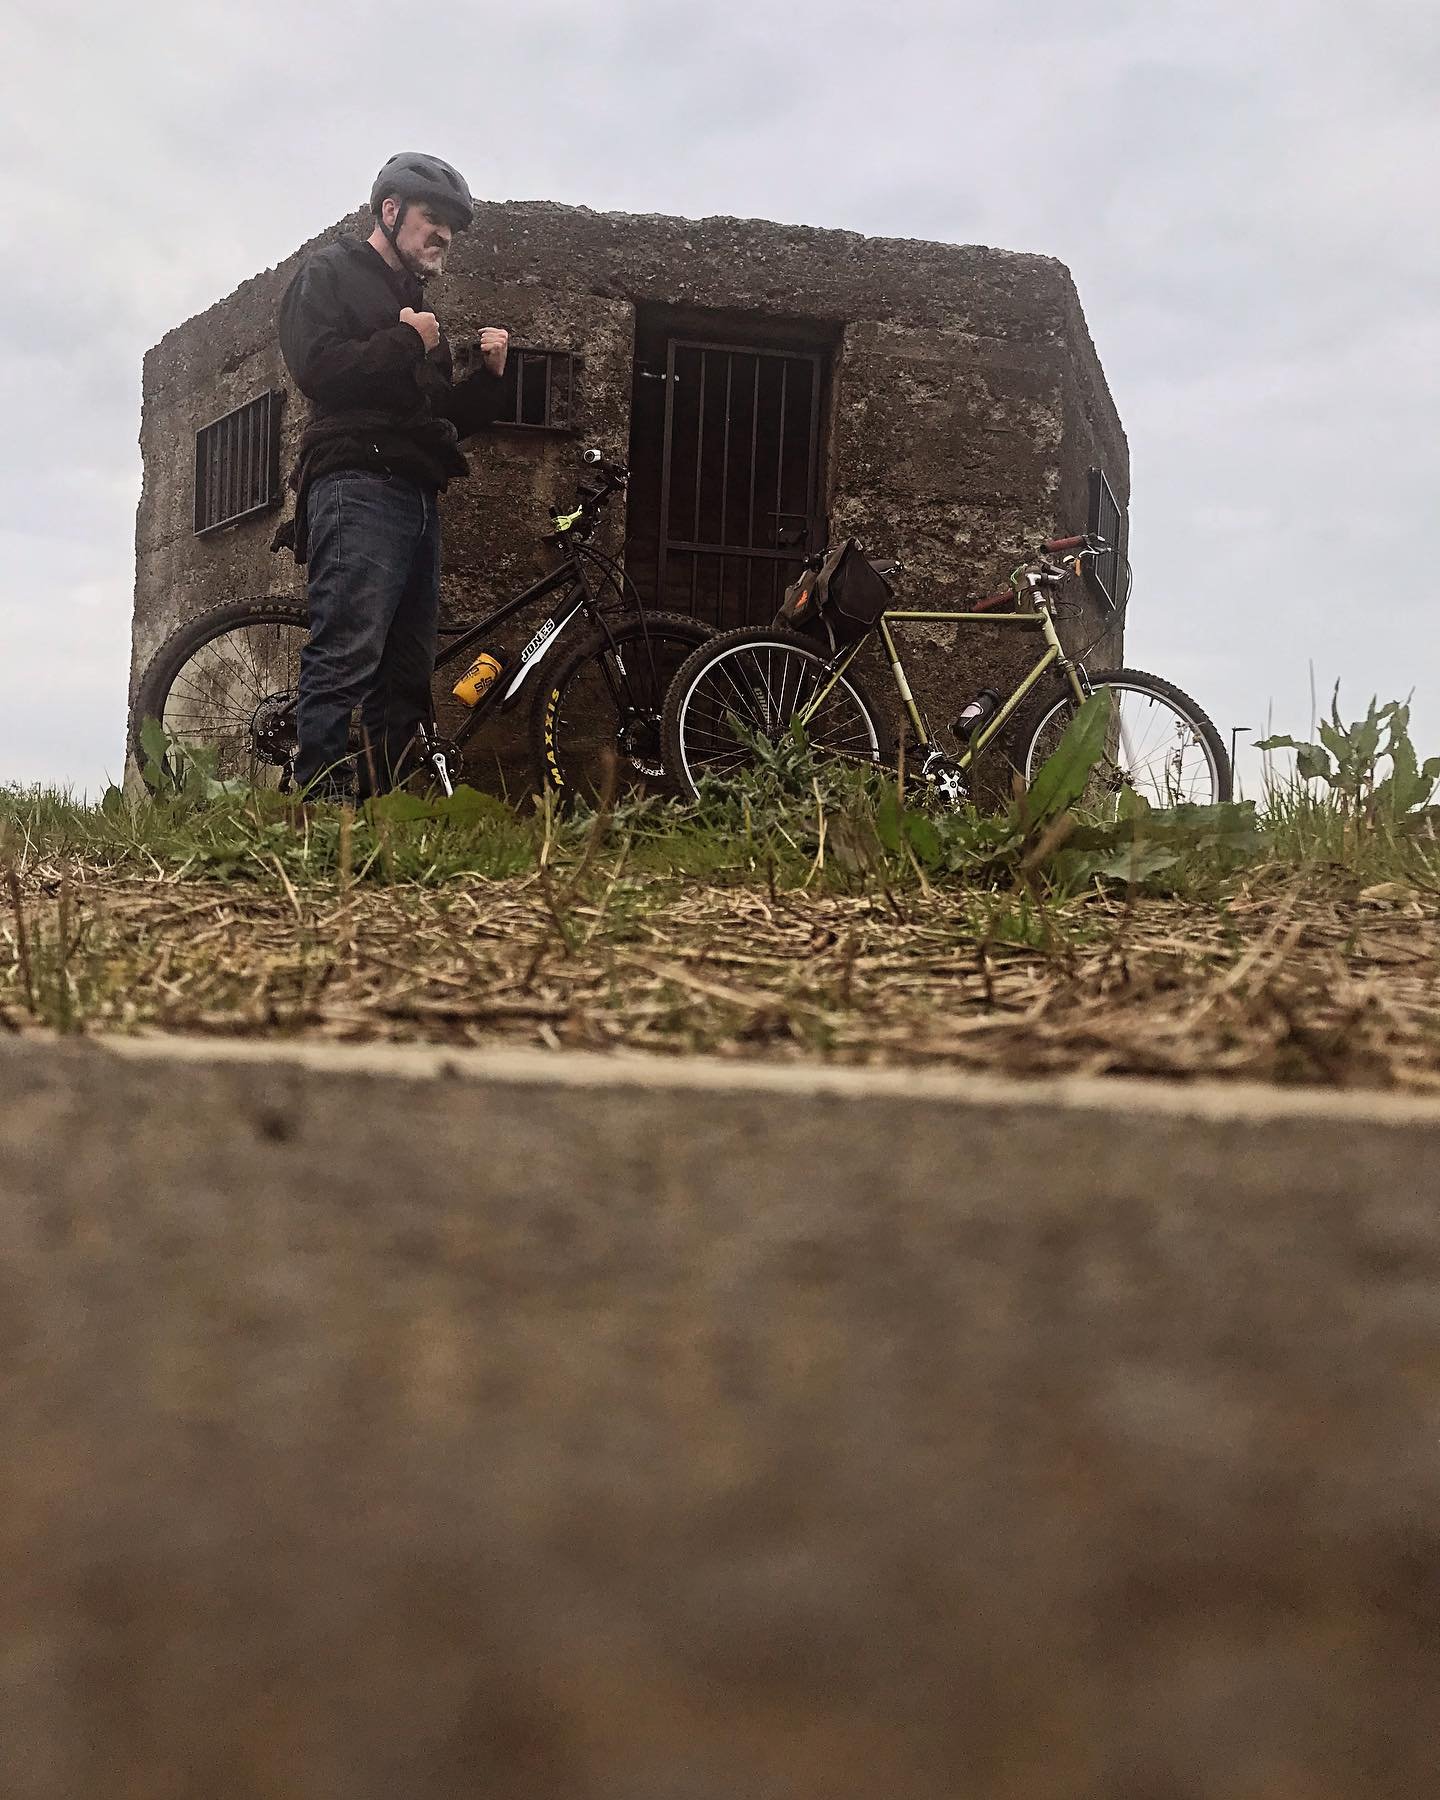 We discovered this little WW2 pill box the other night, crazy what you see when out on a bike. 
@jonesbikes 
@rivbike 
#bikeride #cyclinglife #cyclingshots #cyclinglifestyle #atb #mtb #joeappaloosa #ww2